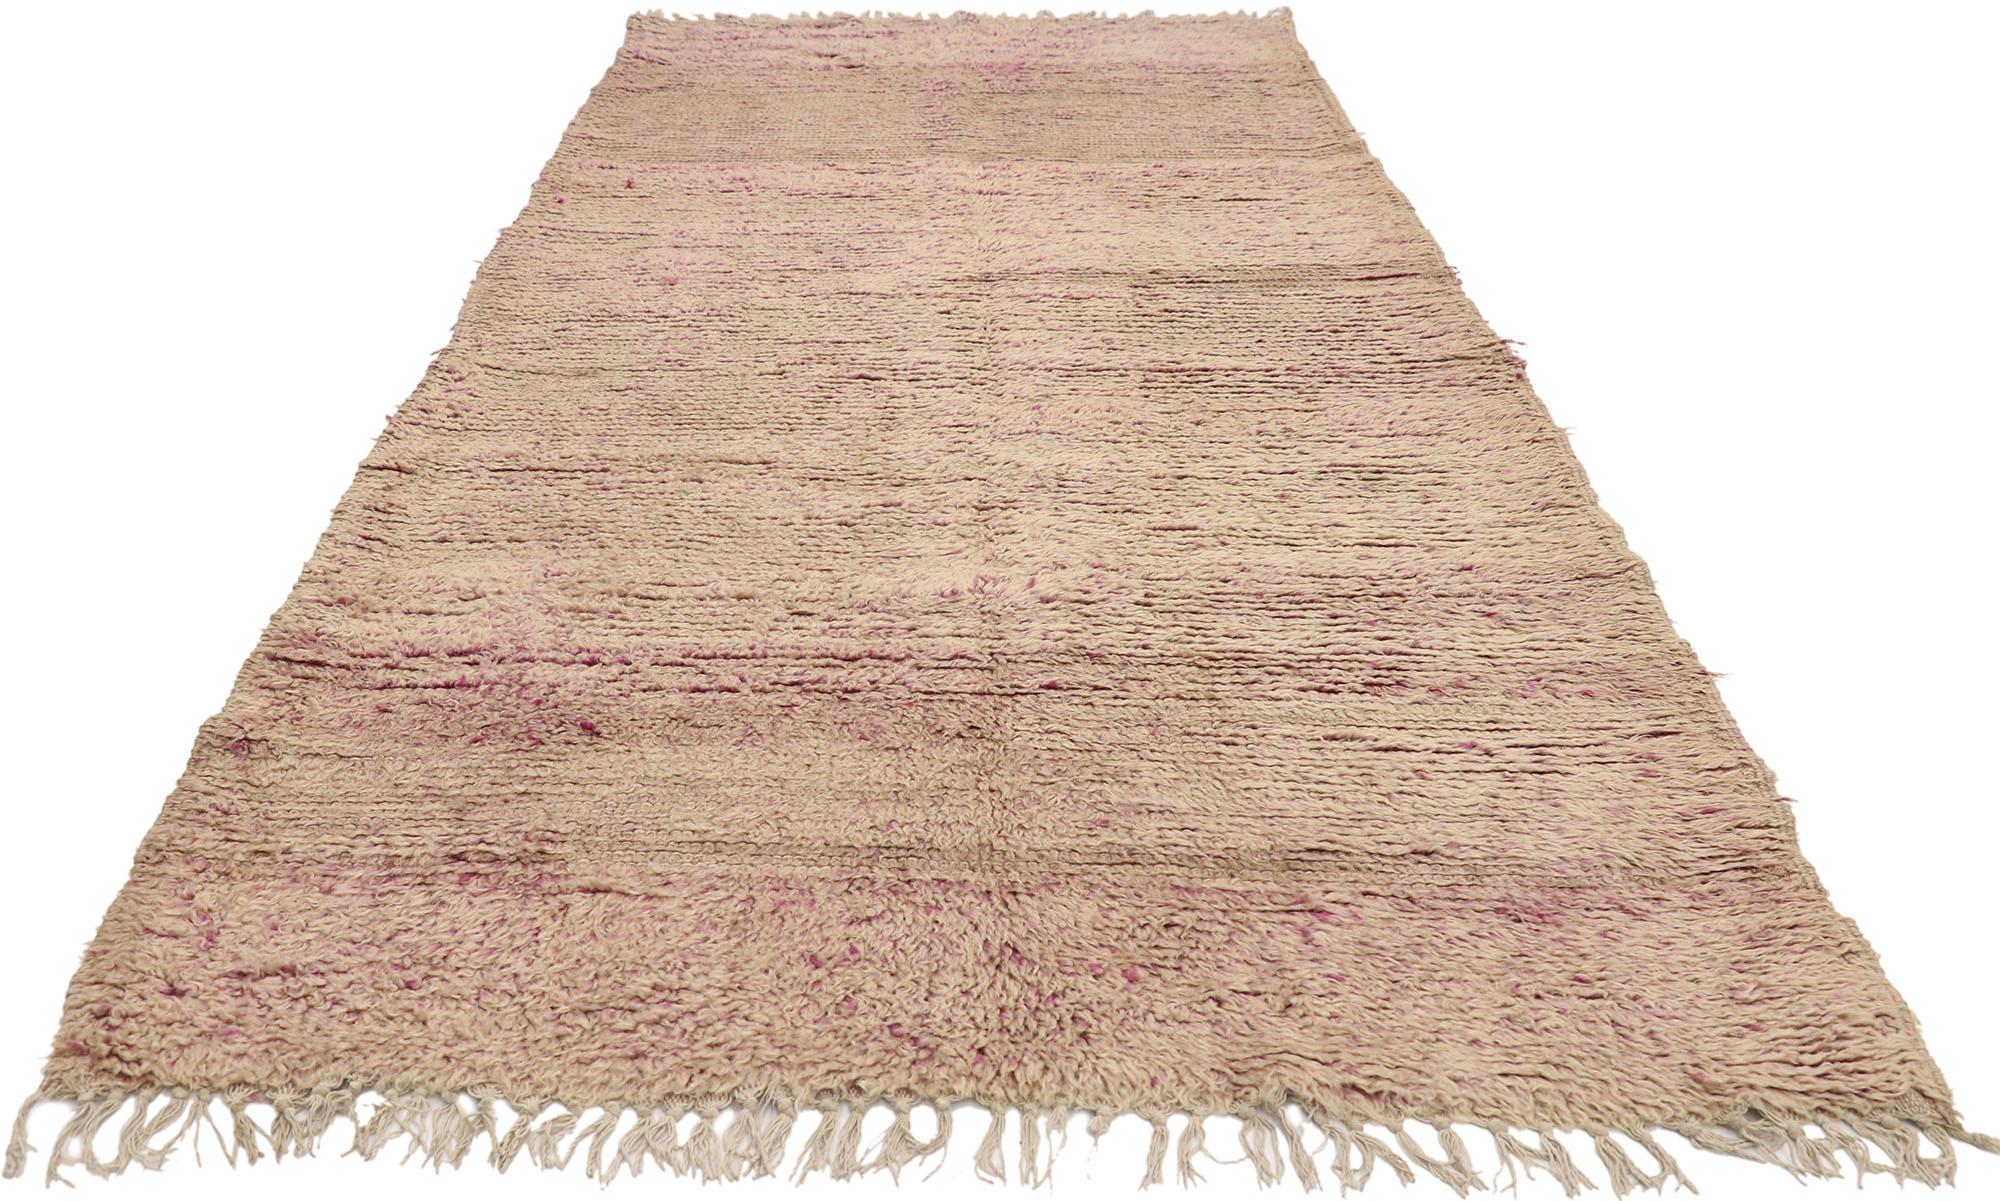 Hand-Knotted Vintage Berber Moroccan Shag Rug, Hallway Runner with Bohemian Style